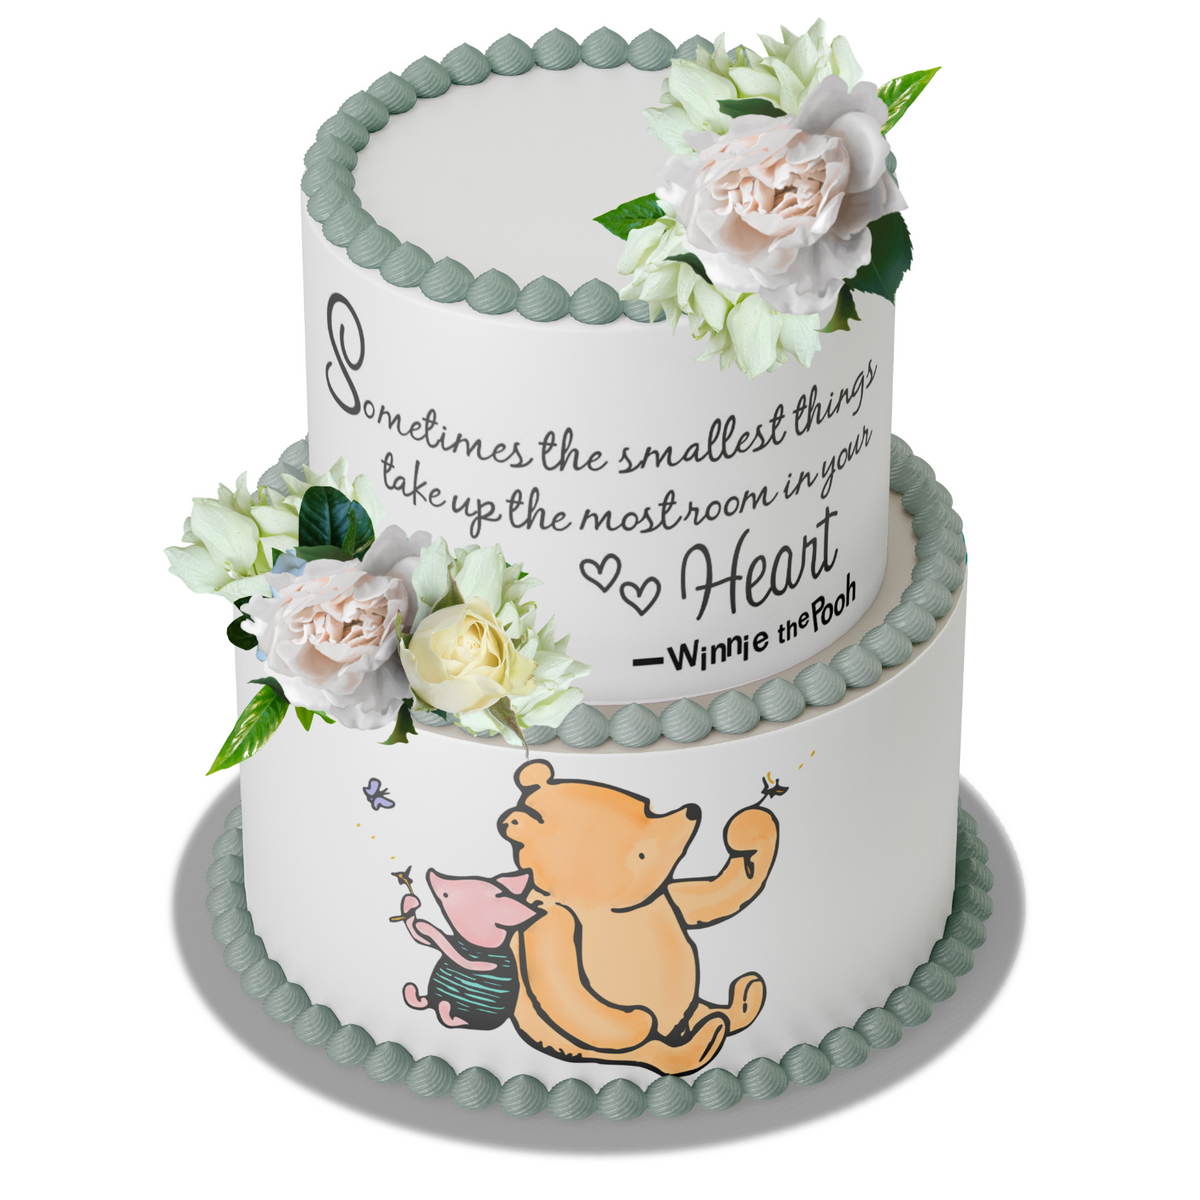 Winnie The Pooh cupcake toppers, Pooh bear toppers, Icing sheets EDIBLE